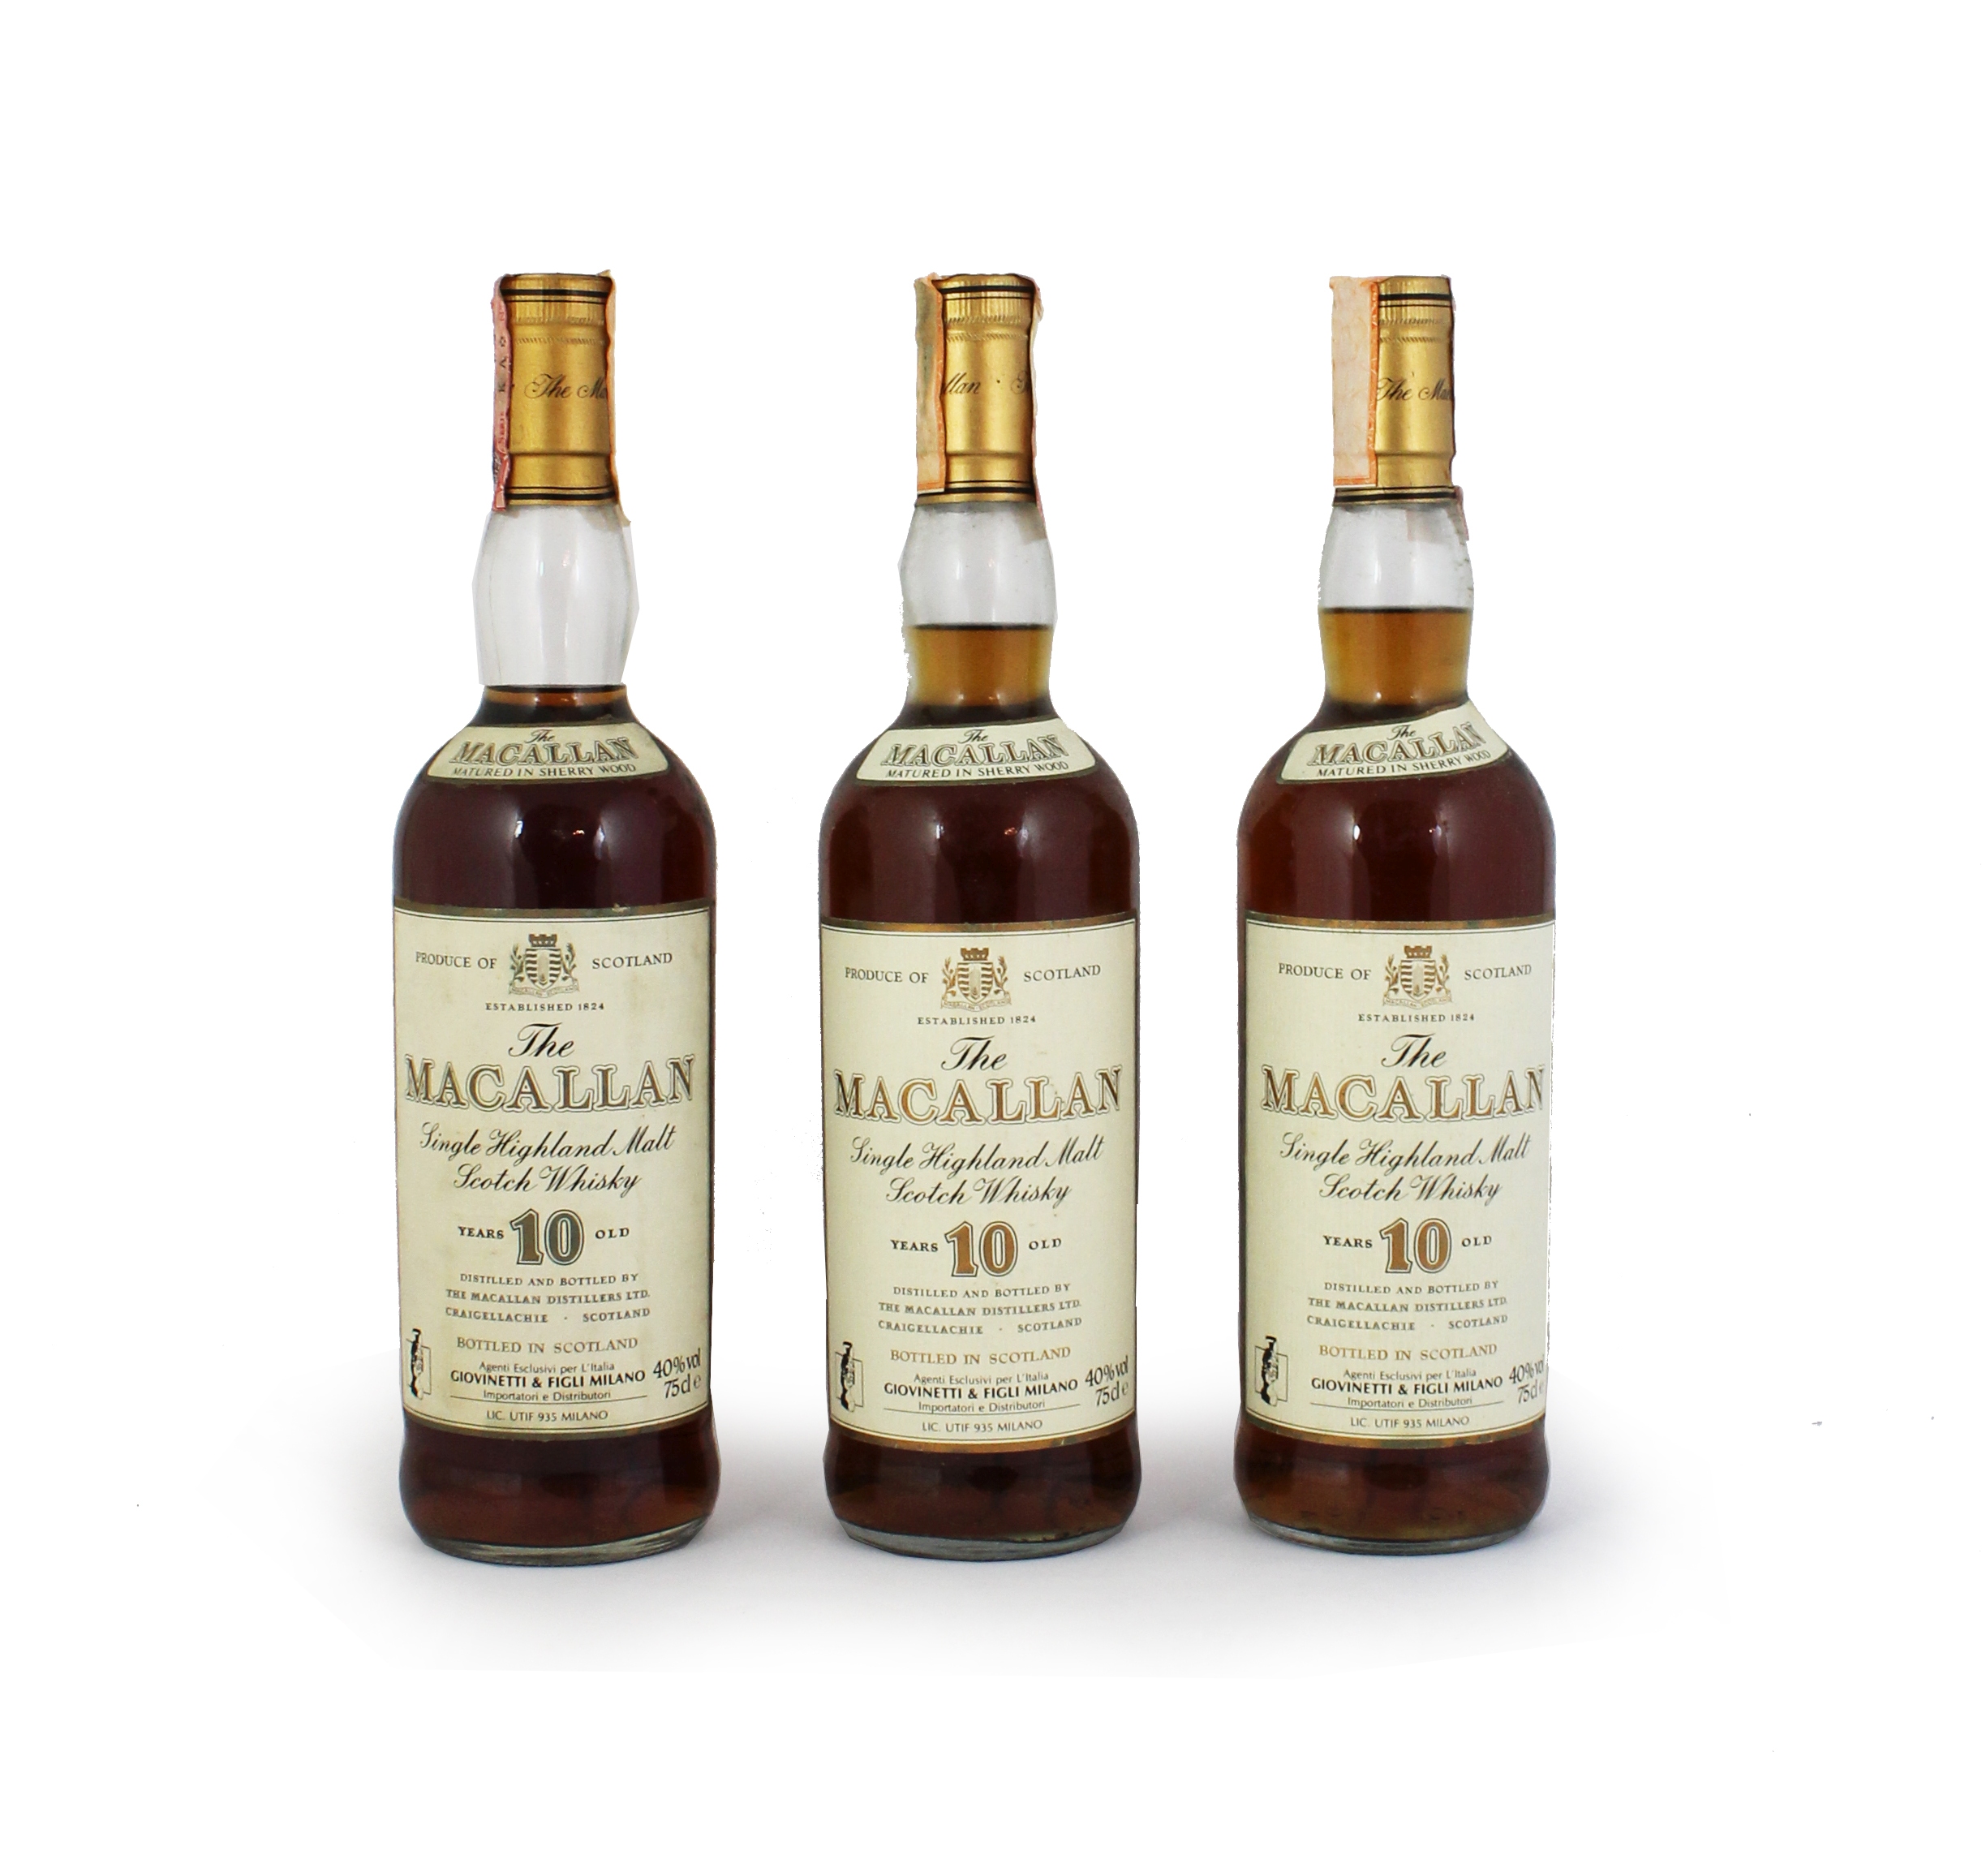 The Macallan-10 year old (5) - Image 3 of 4